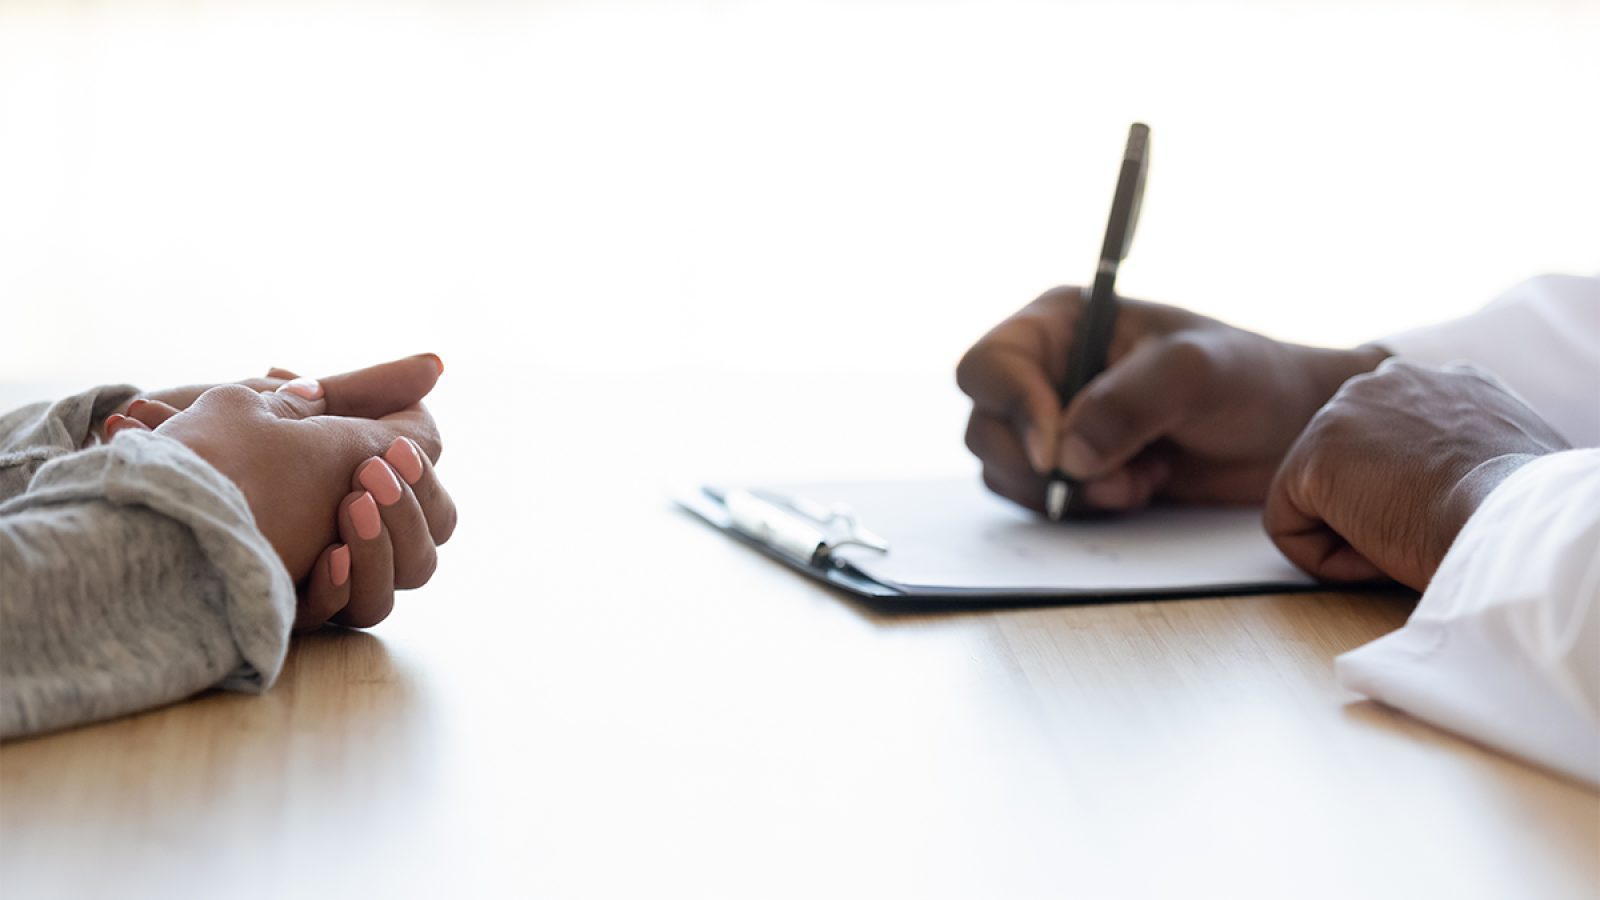 An image of two hands clasped across from a person writing on a notepad.